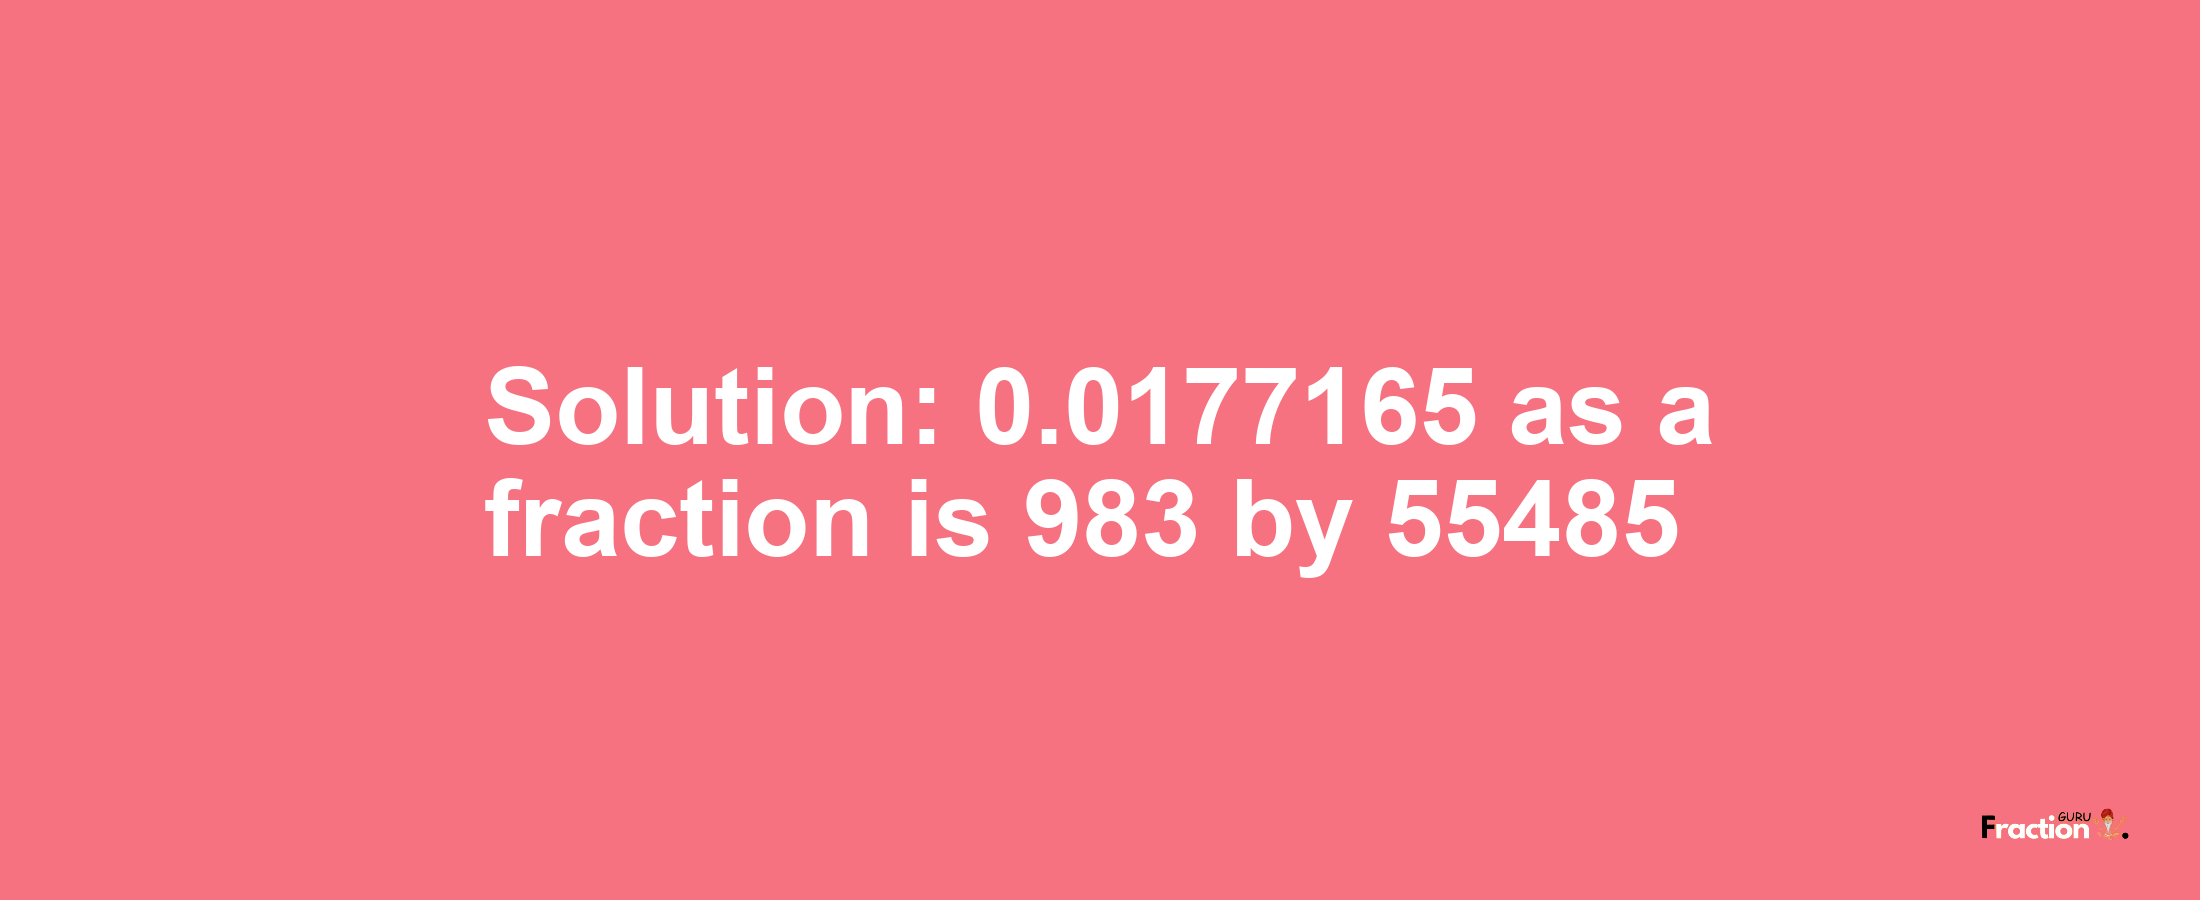 Solution:0.0177165 as a fraction is 983/55485